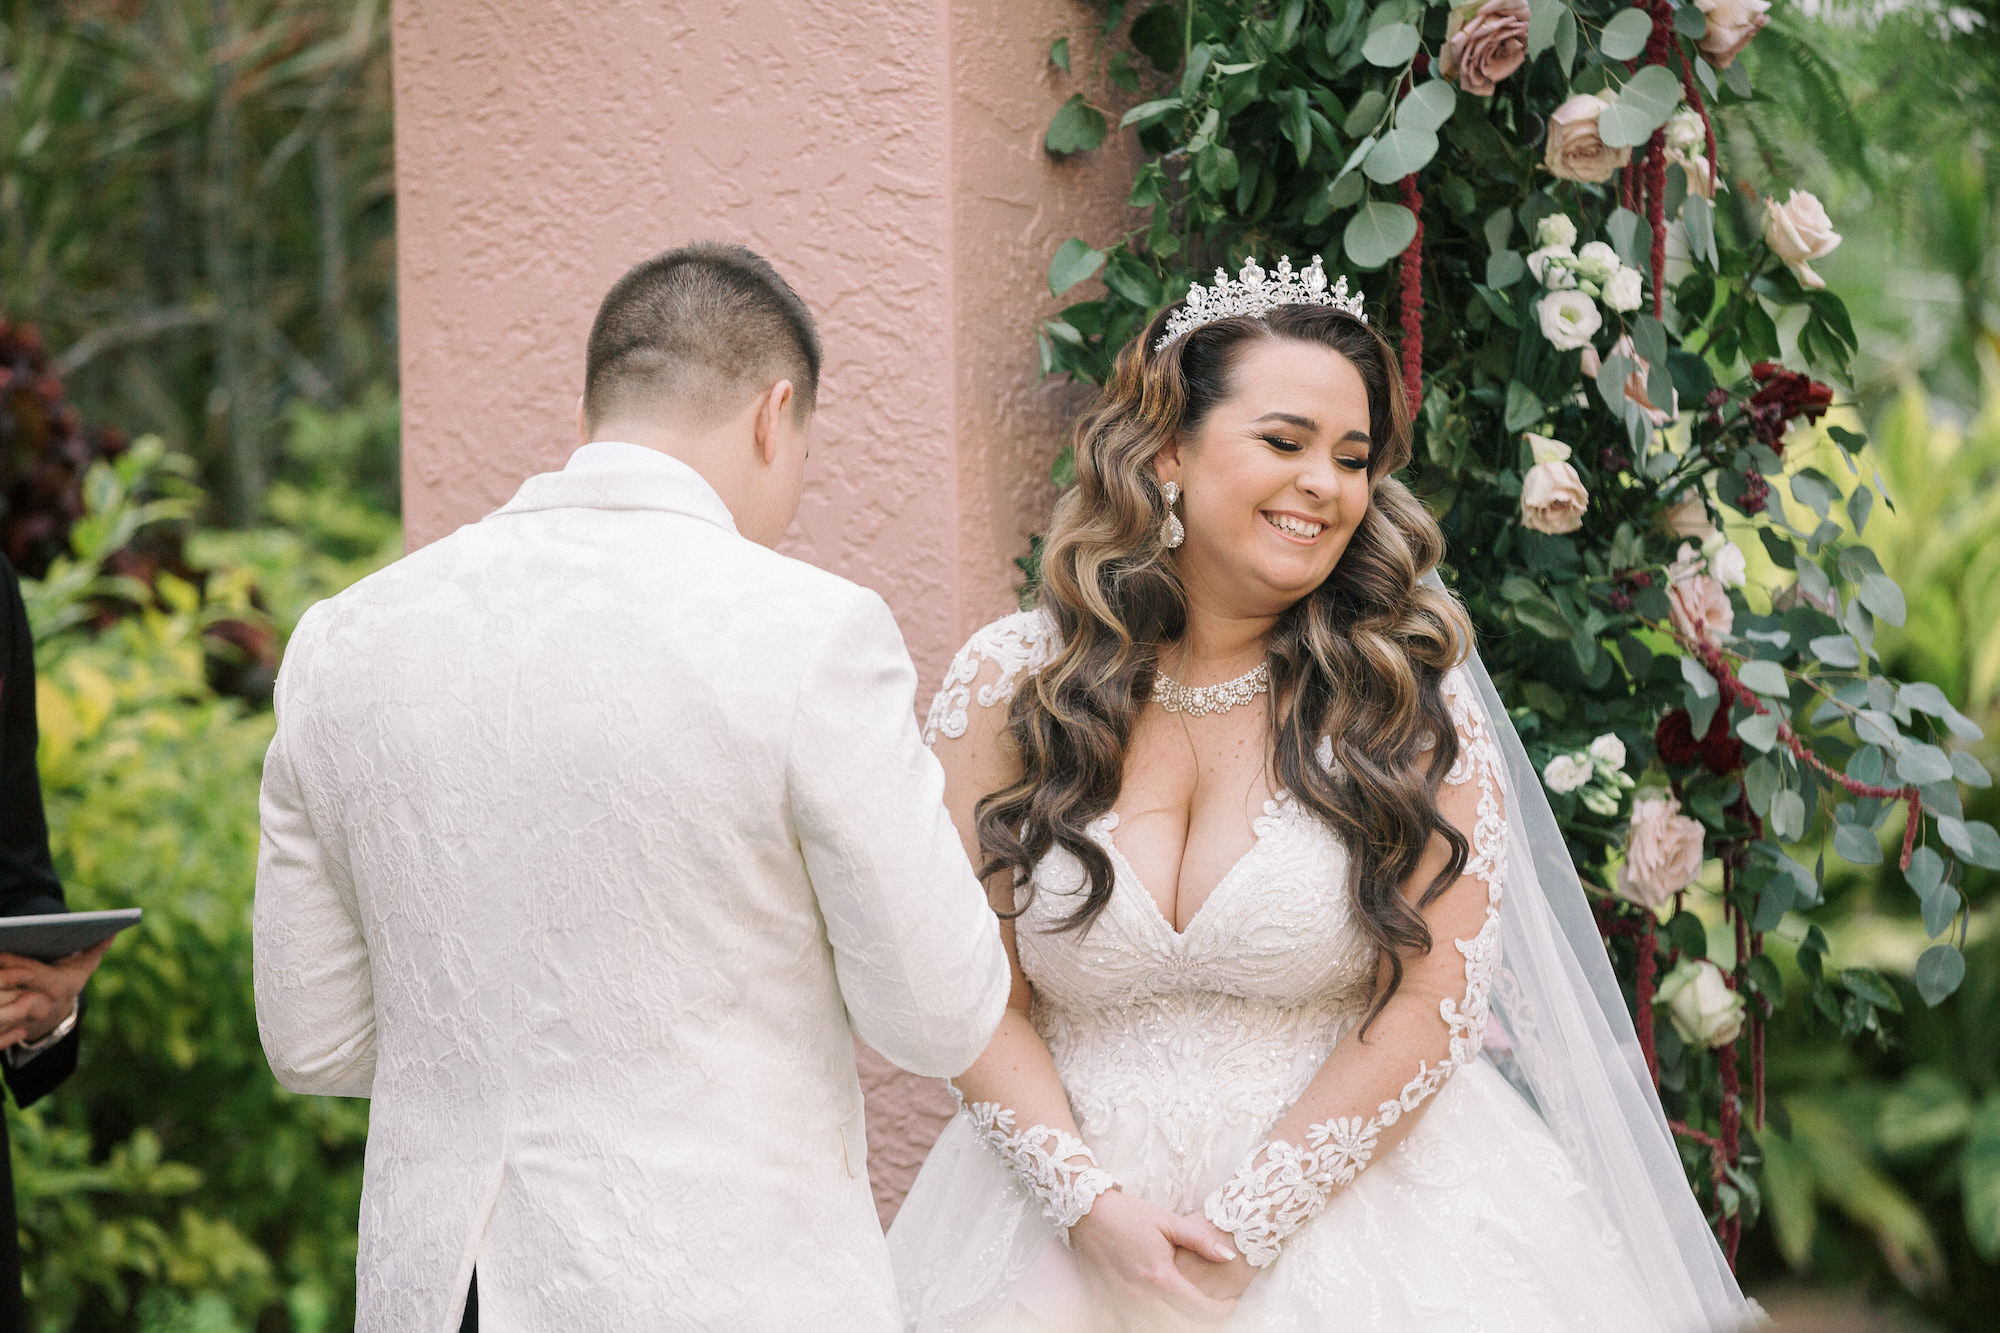 Emotionally Happy Bride Wearing Romantic Lace and Illusion Long Sleeve Deep V Neckline Wedding Dress and Princess Tiara with Veil Exchanging Wedding Vows During Ceremony | Tampa Bay Wedding Hair and Makeup Femme Akoi Beauty Studio